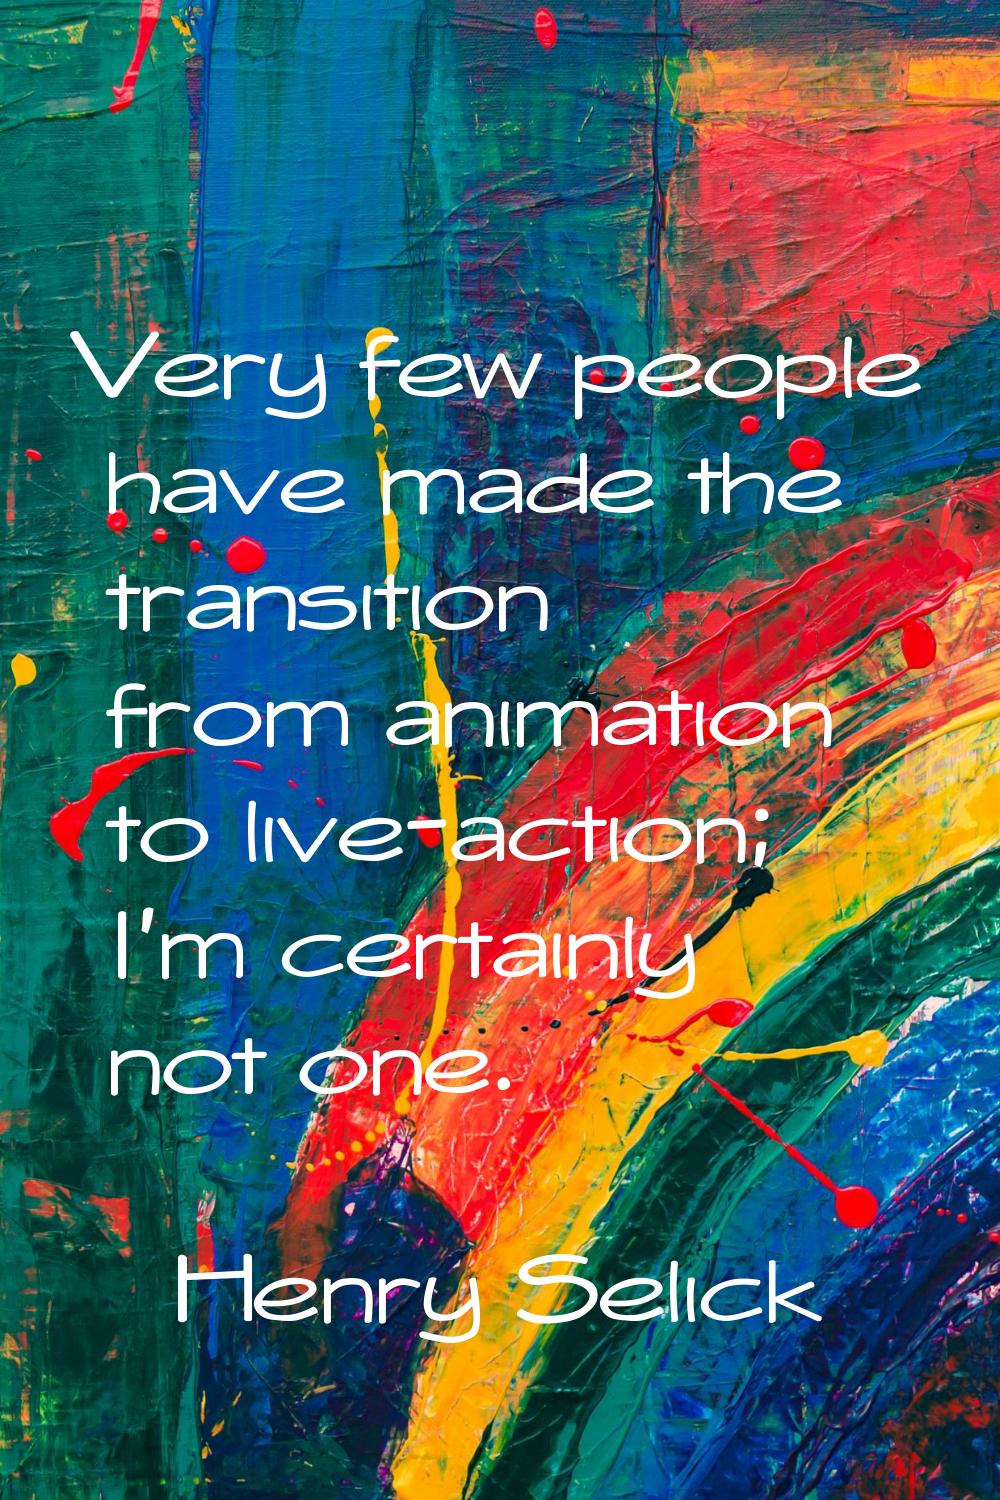 Very few people have made the transition from animation to live-action; I'm certainly not one.